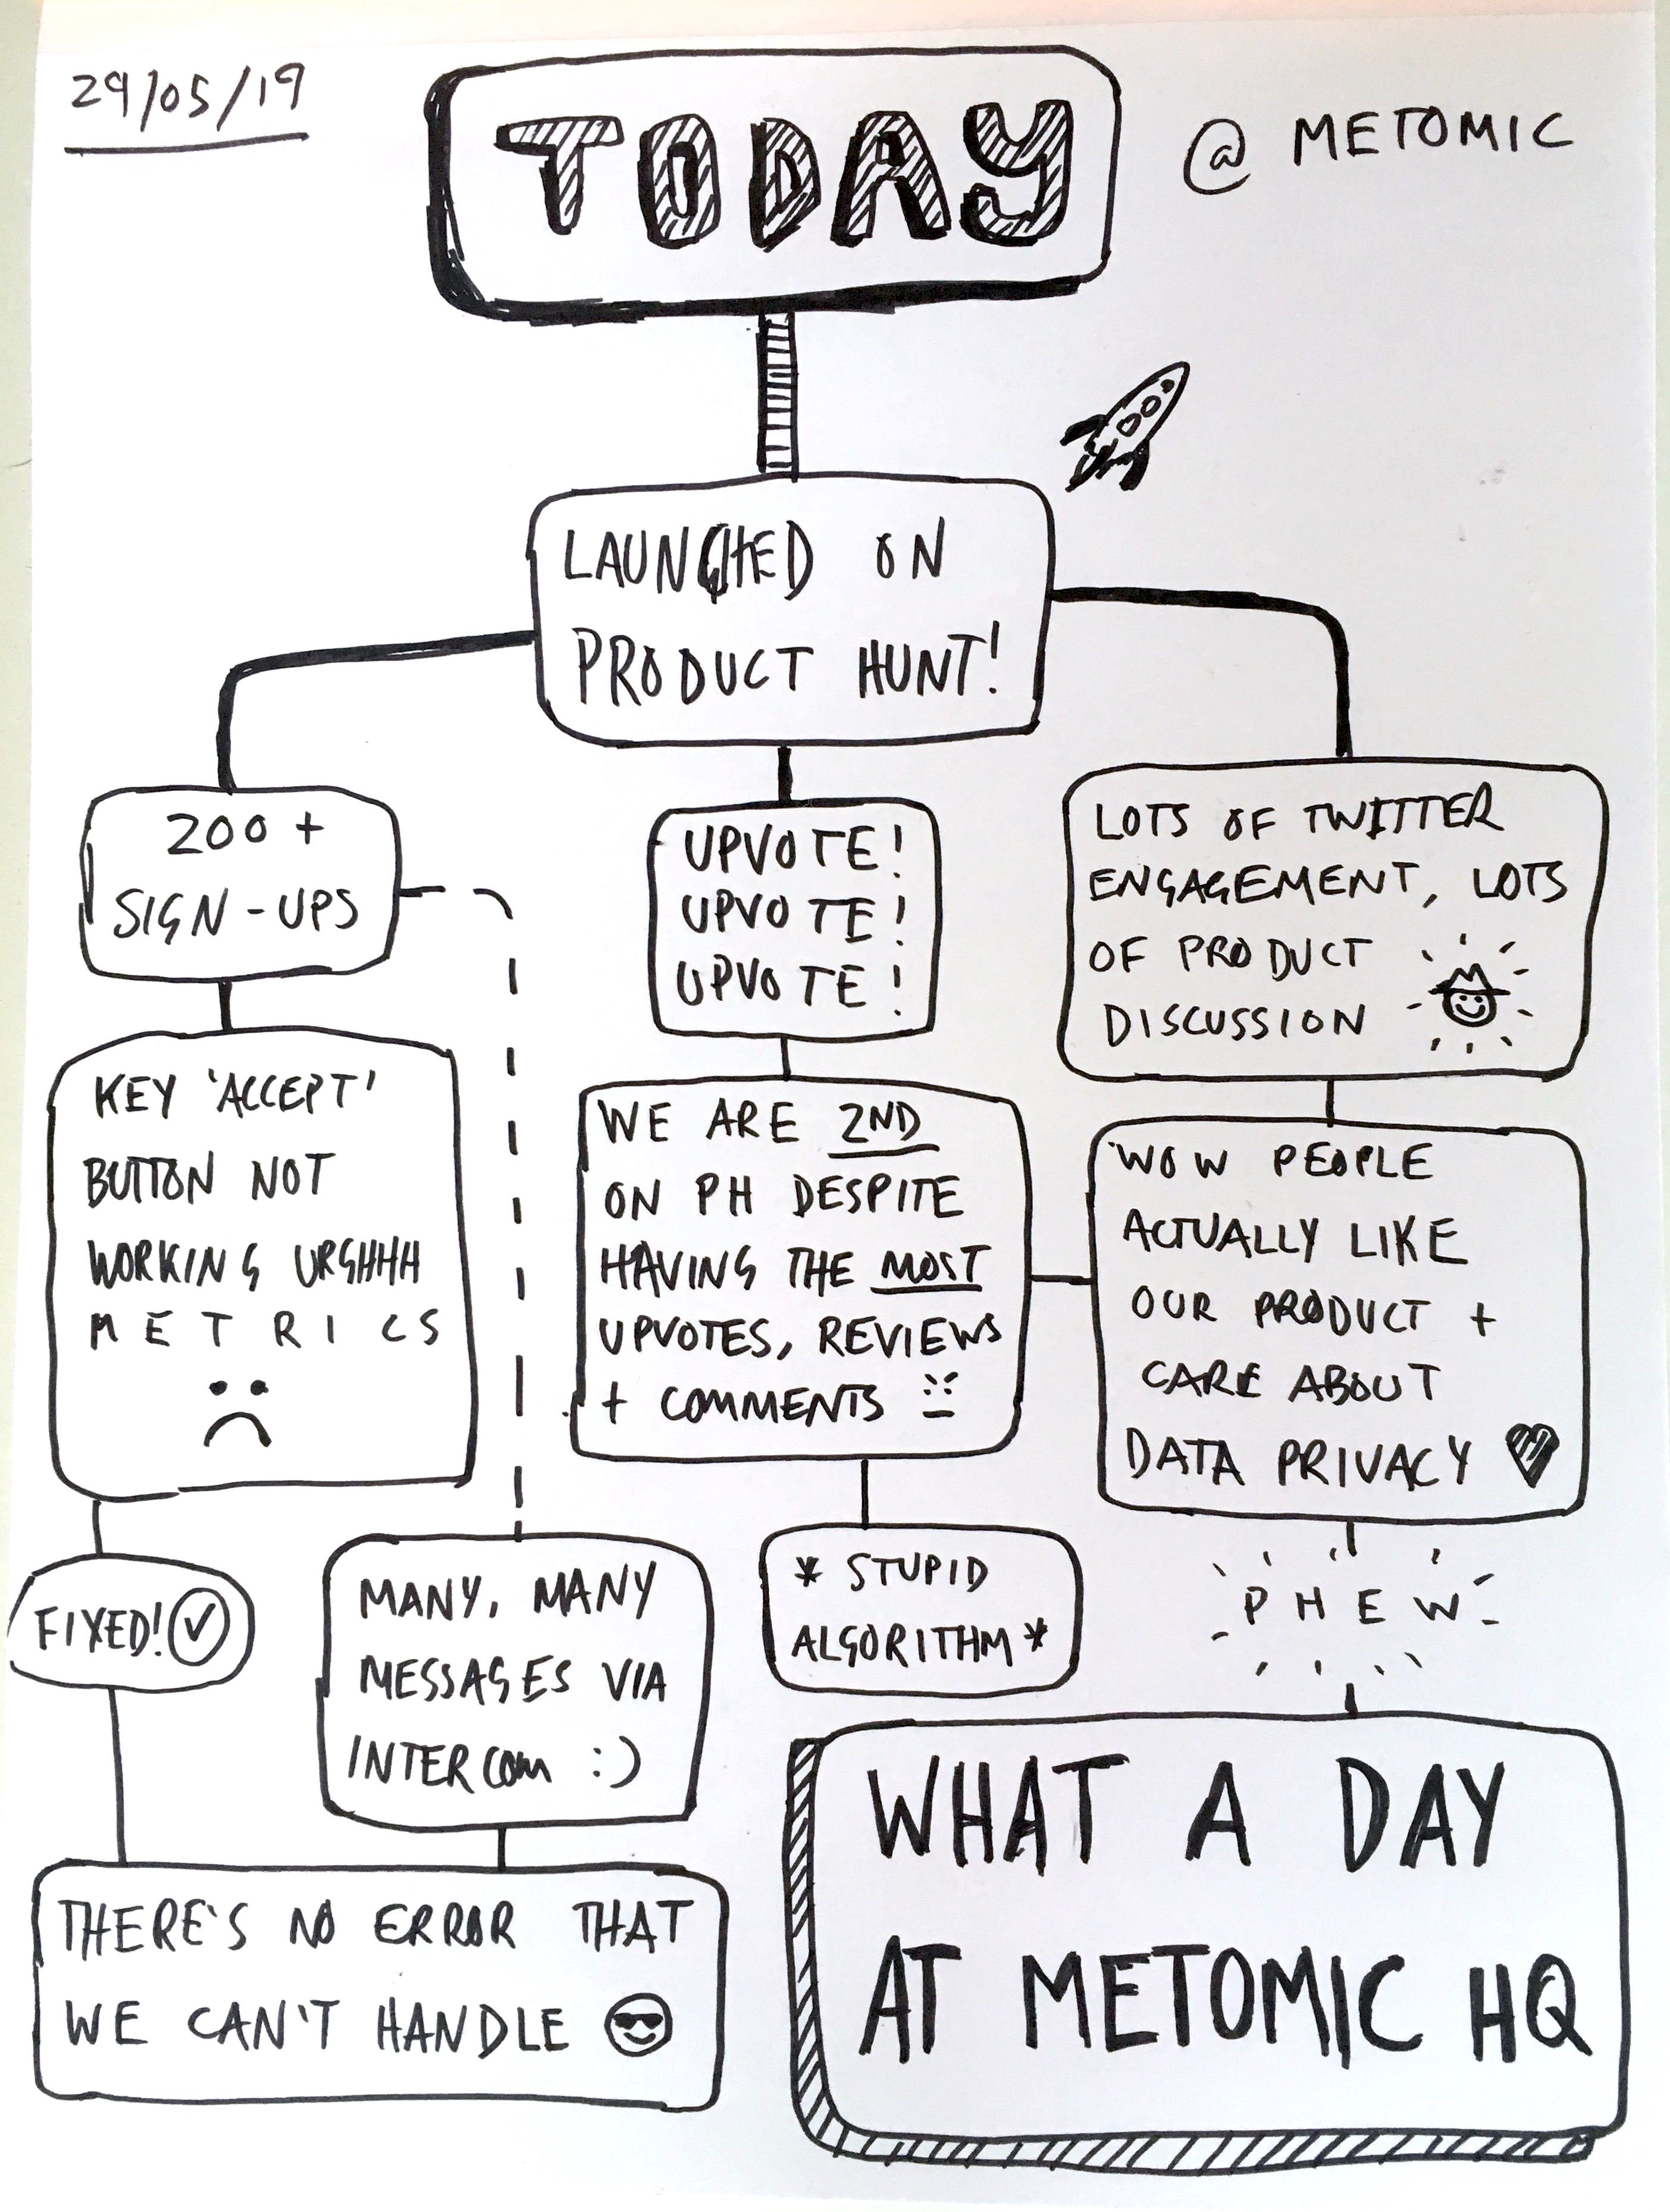 An infographic of what happens of Product Hunt launch day